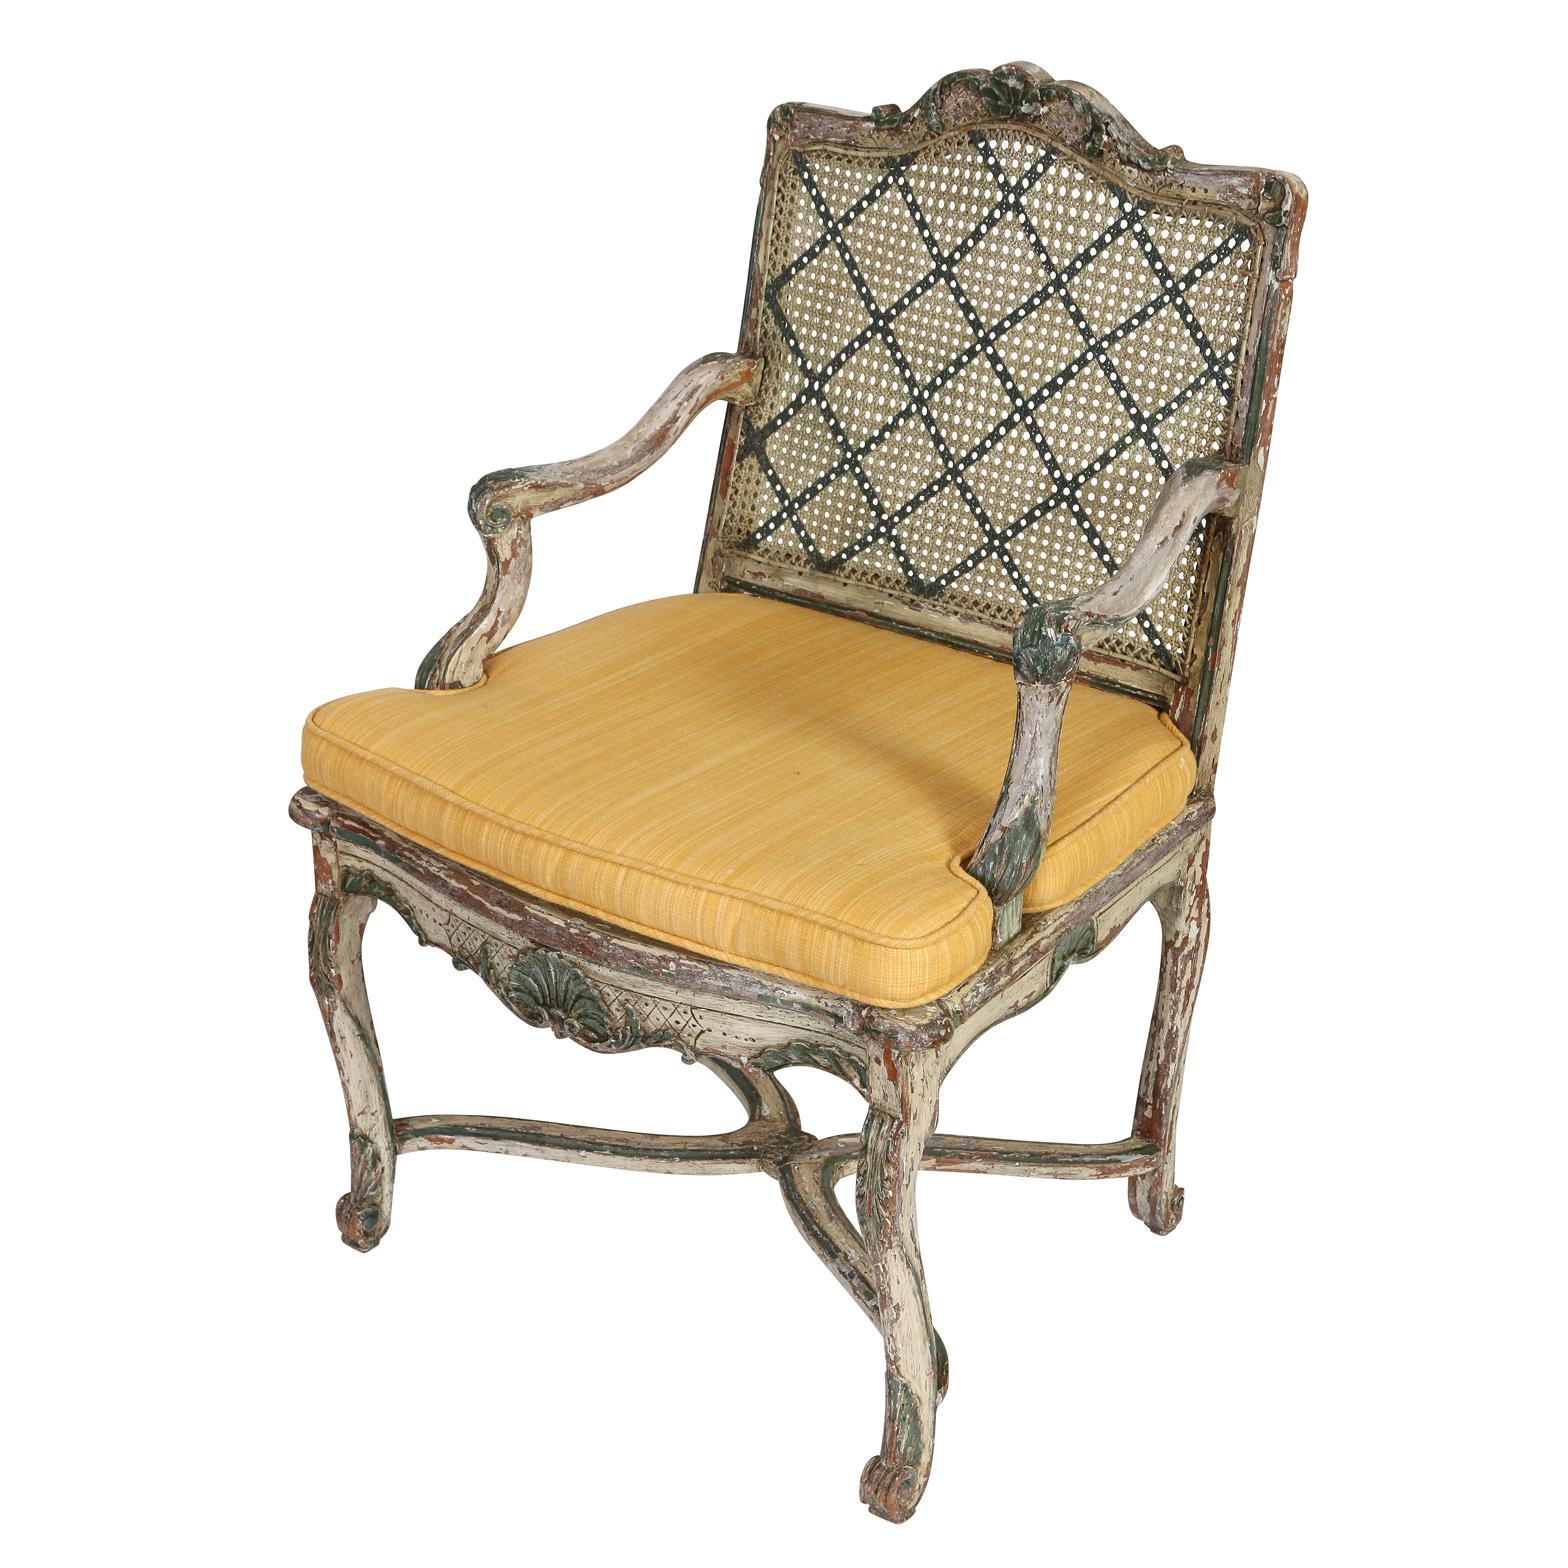 Hand-Painted Louis XV Style Fauteuil with Painted Caned Back and Yellow Seat